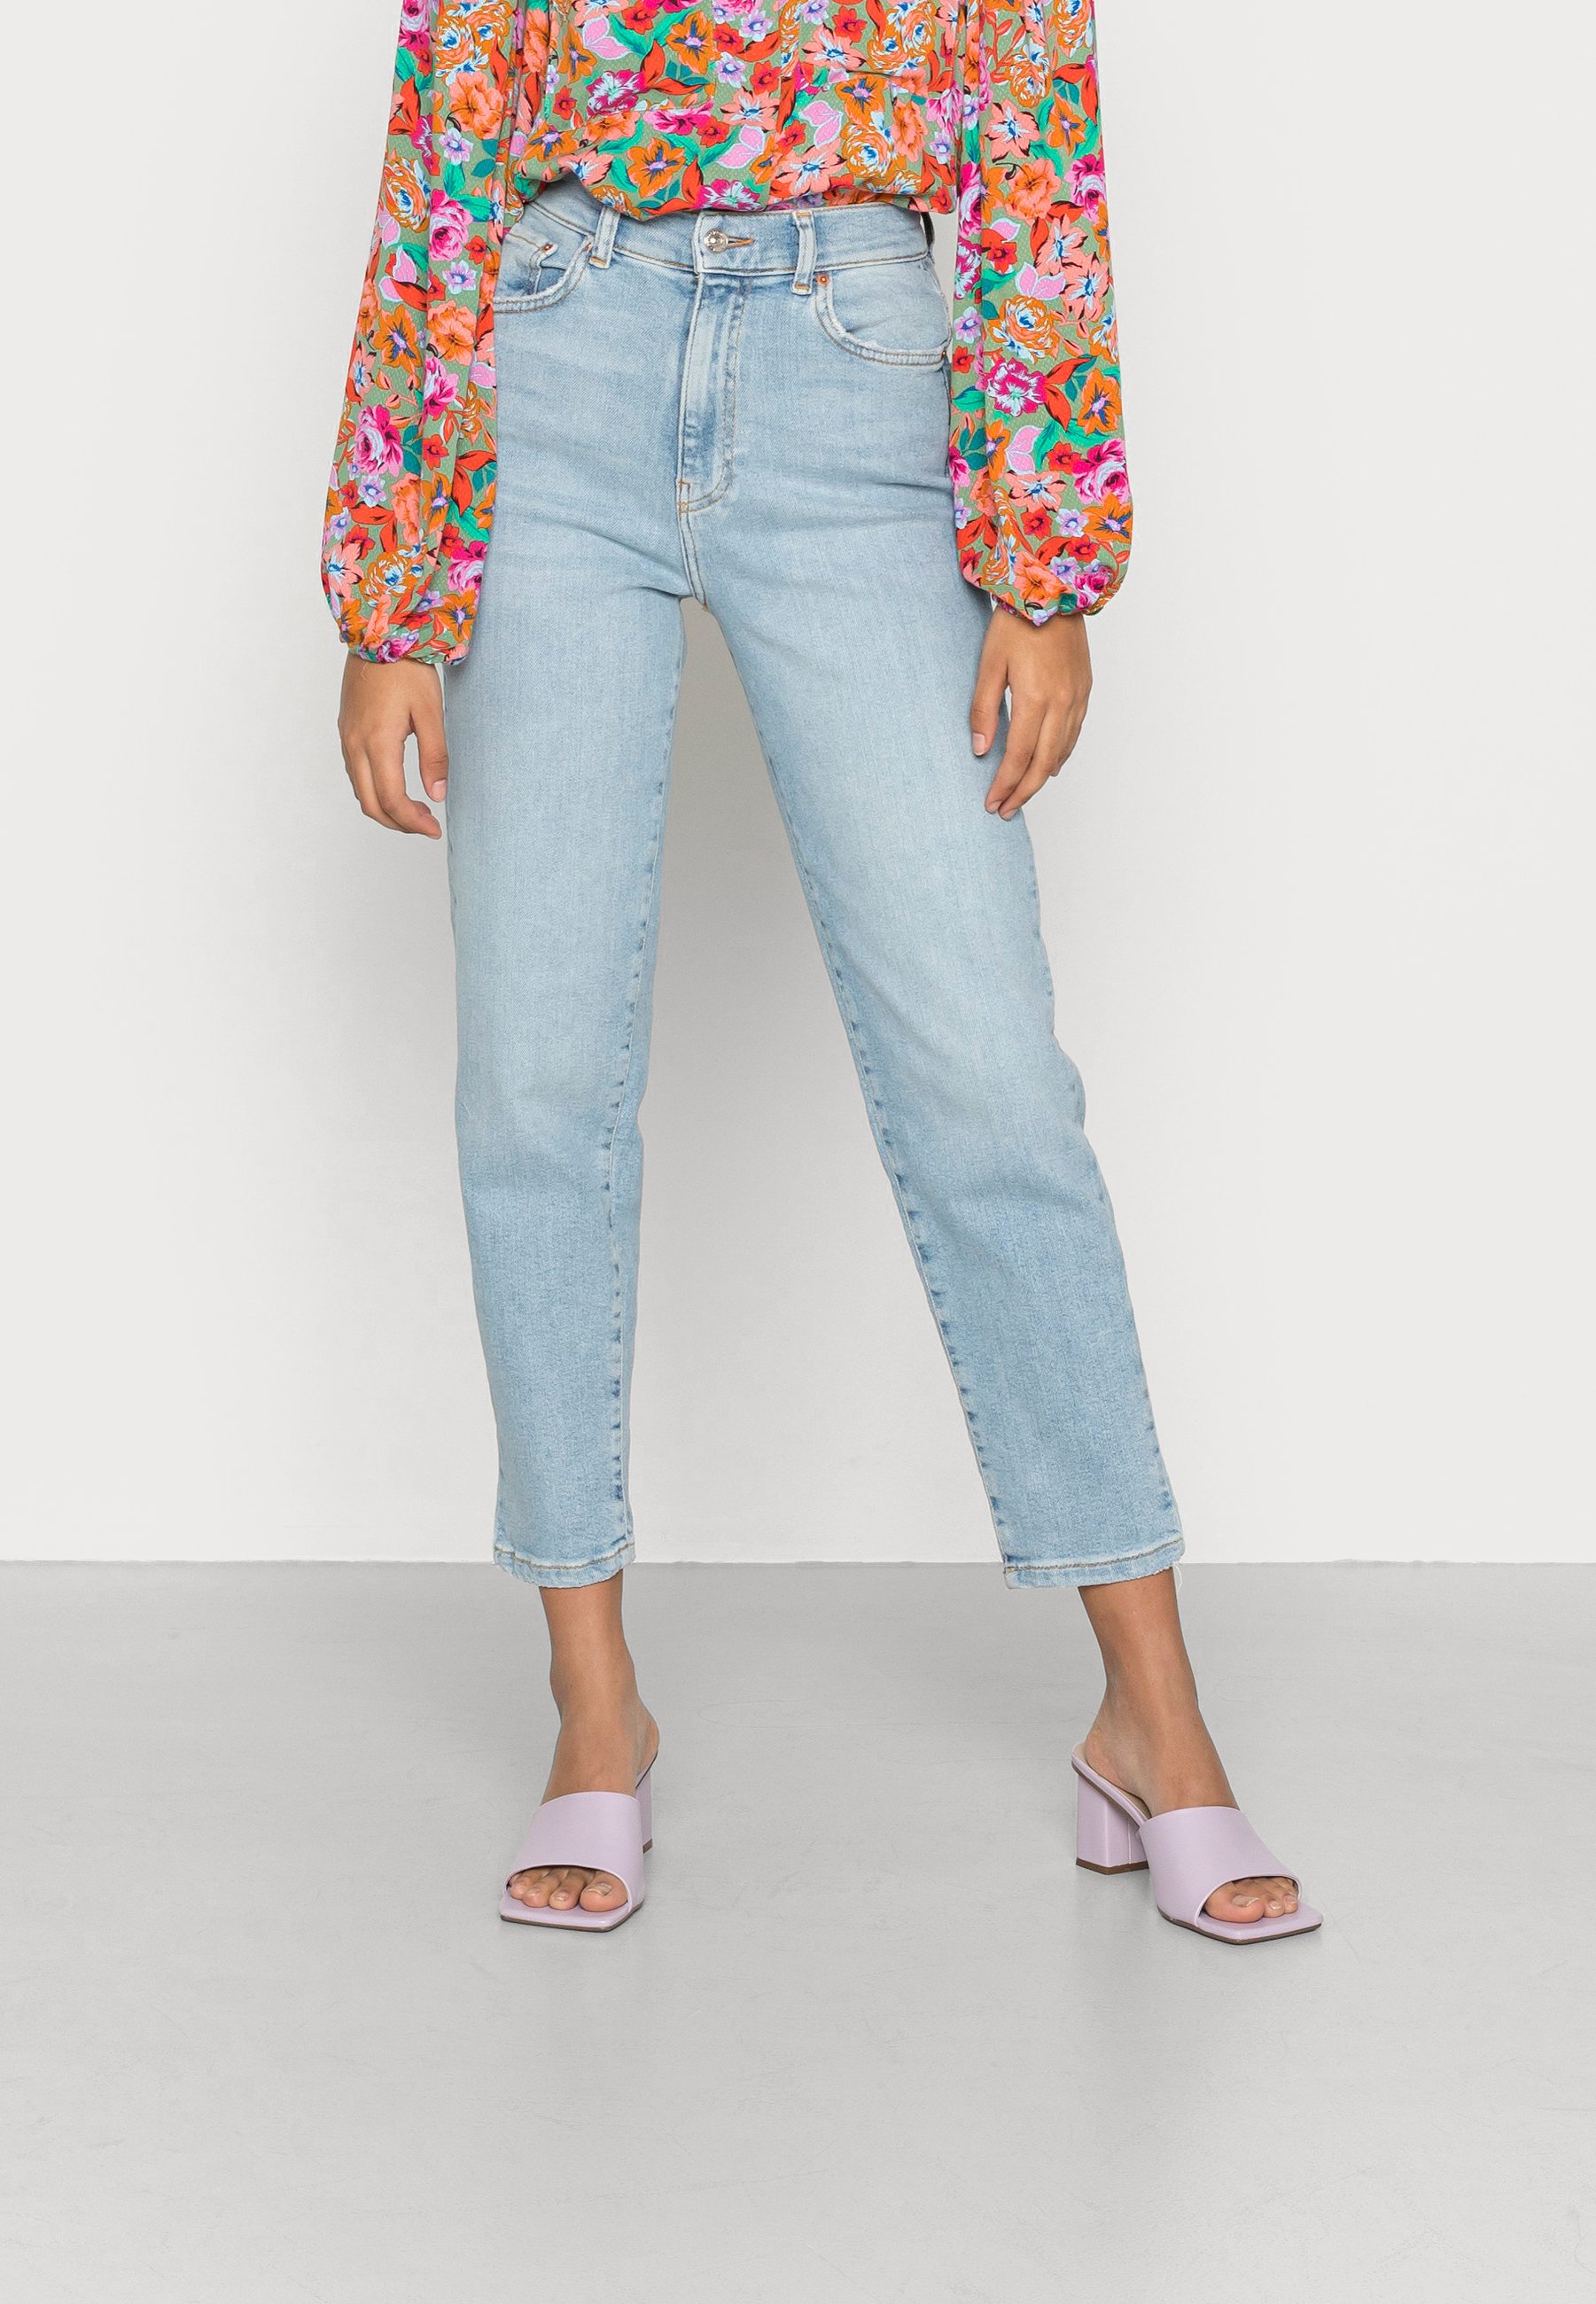 Gina Tricot COMFY MOM - Jeans Relaxed Fit - sea blue/light-blue denim